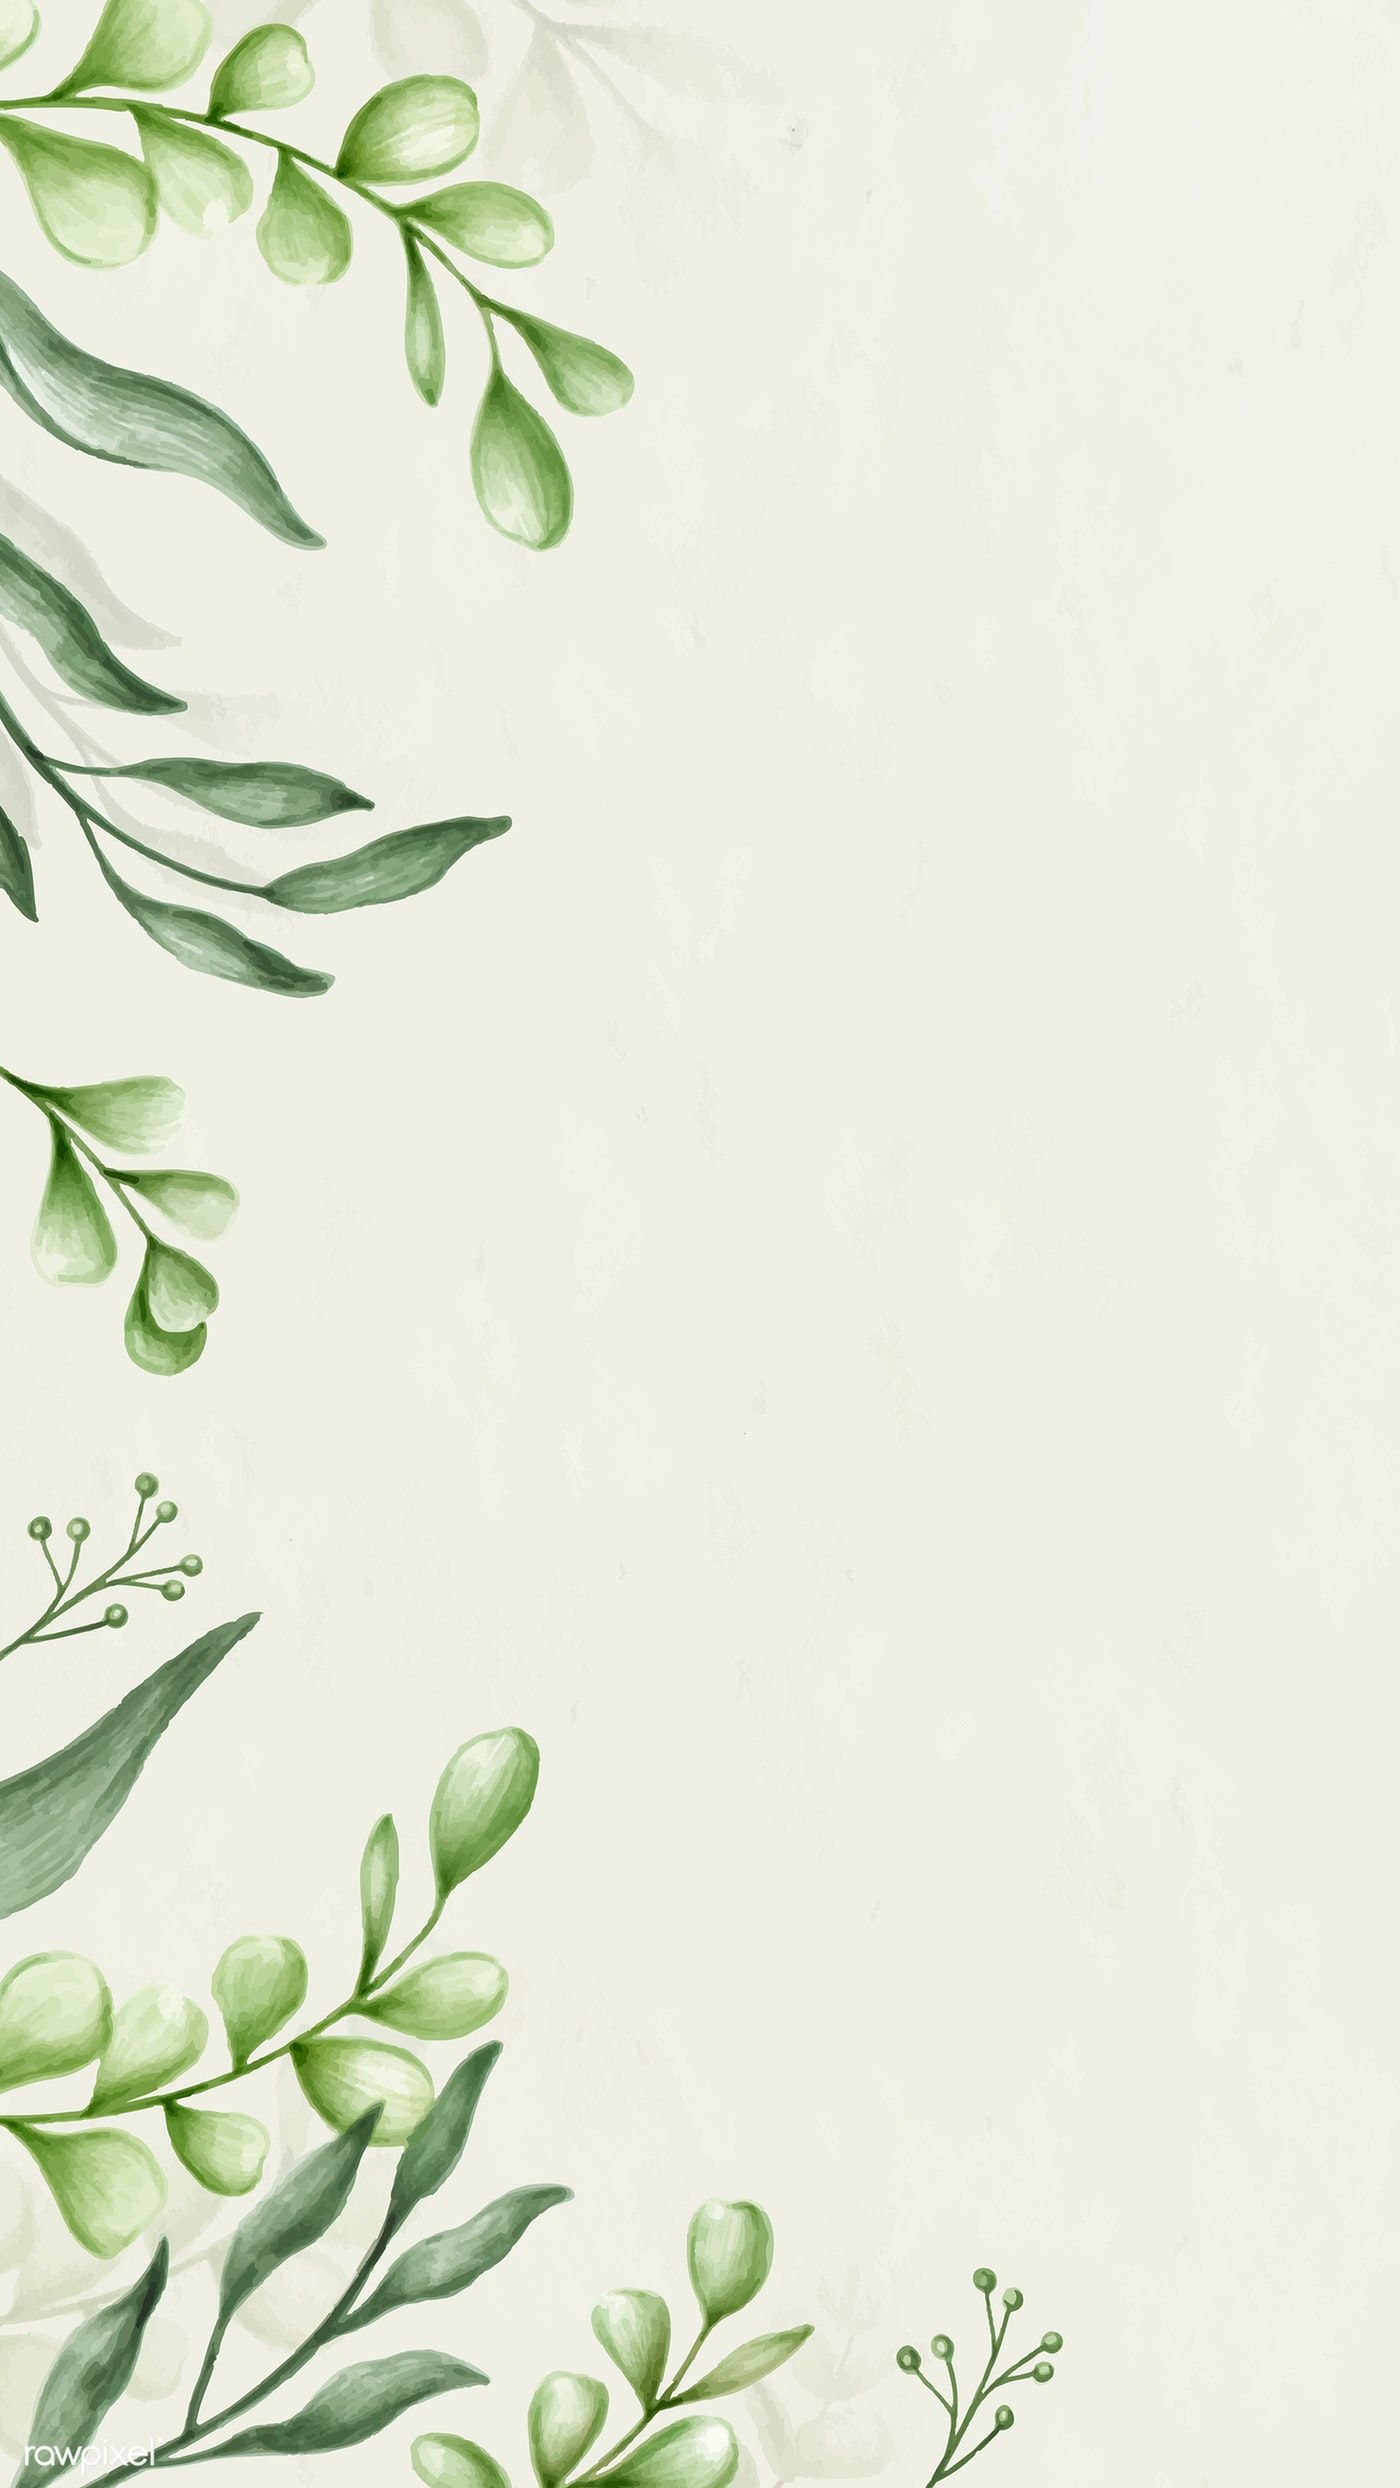 Download premium vector of Green leaves background decoration mobile phone wallpaper vector by Noon about botanical phone background botanical watercolor mobile phone wallpaper green watercolor  background and invitation 2032829